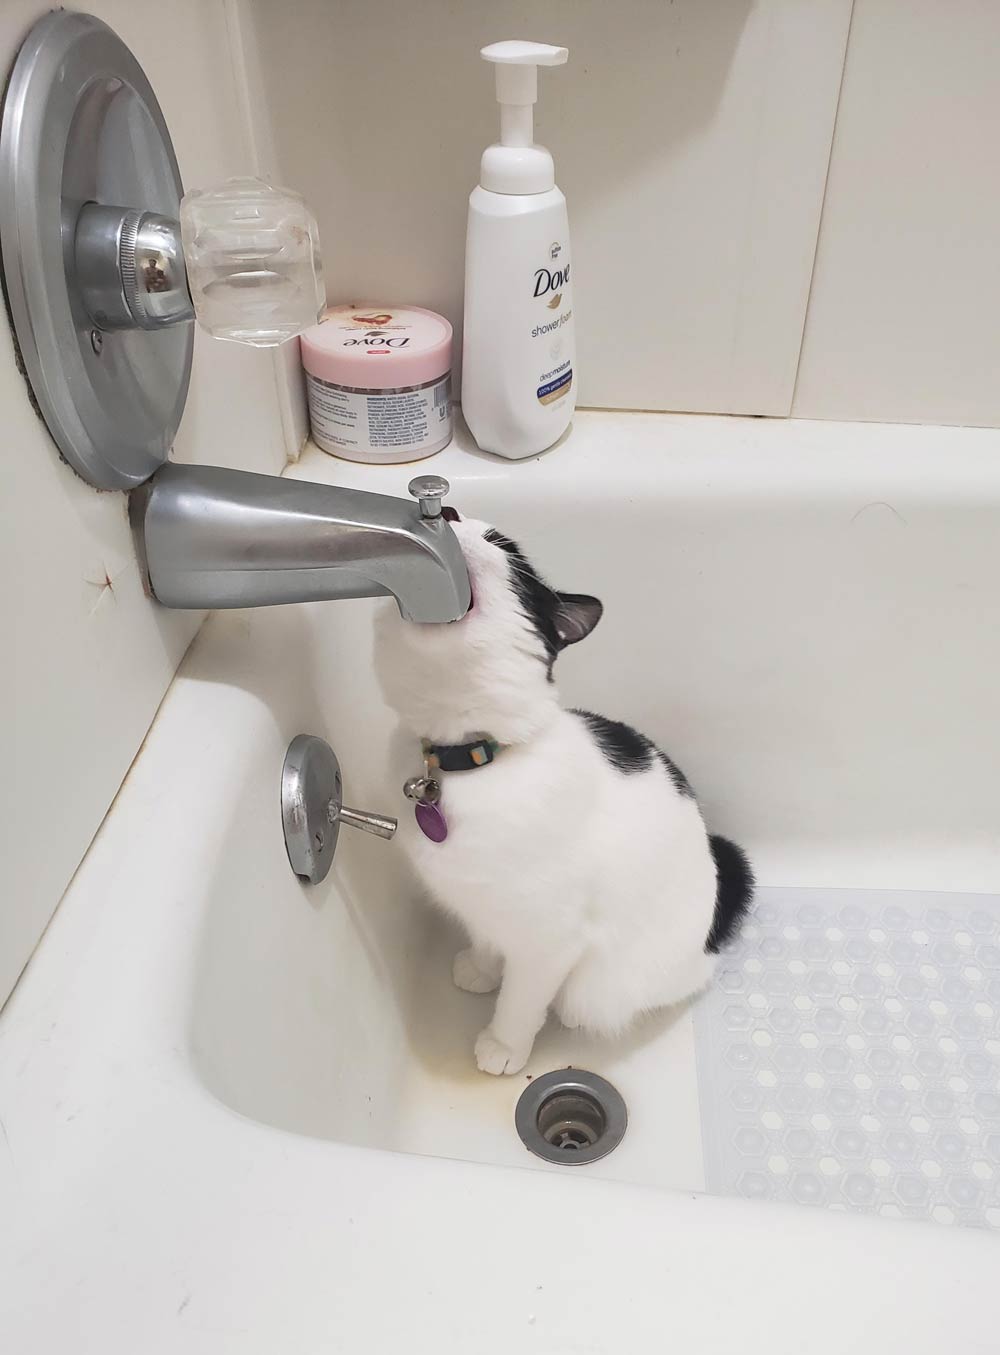 Sometimes my cat tries to deep throat the shower faucet